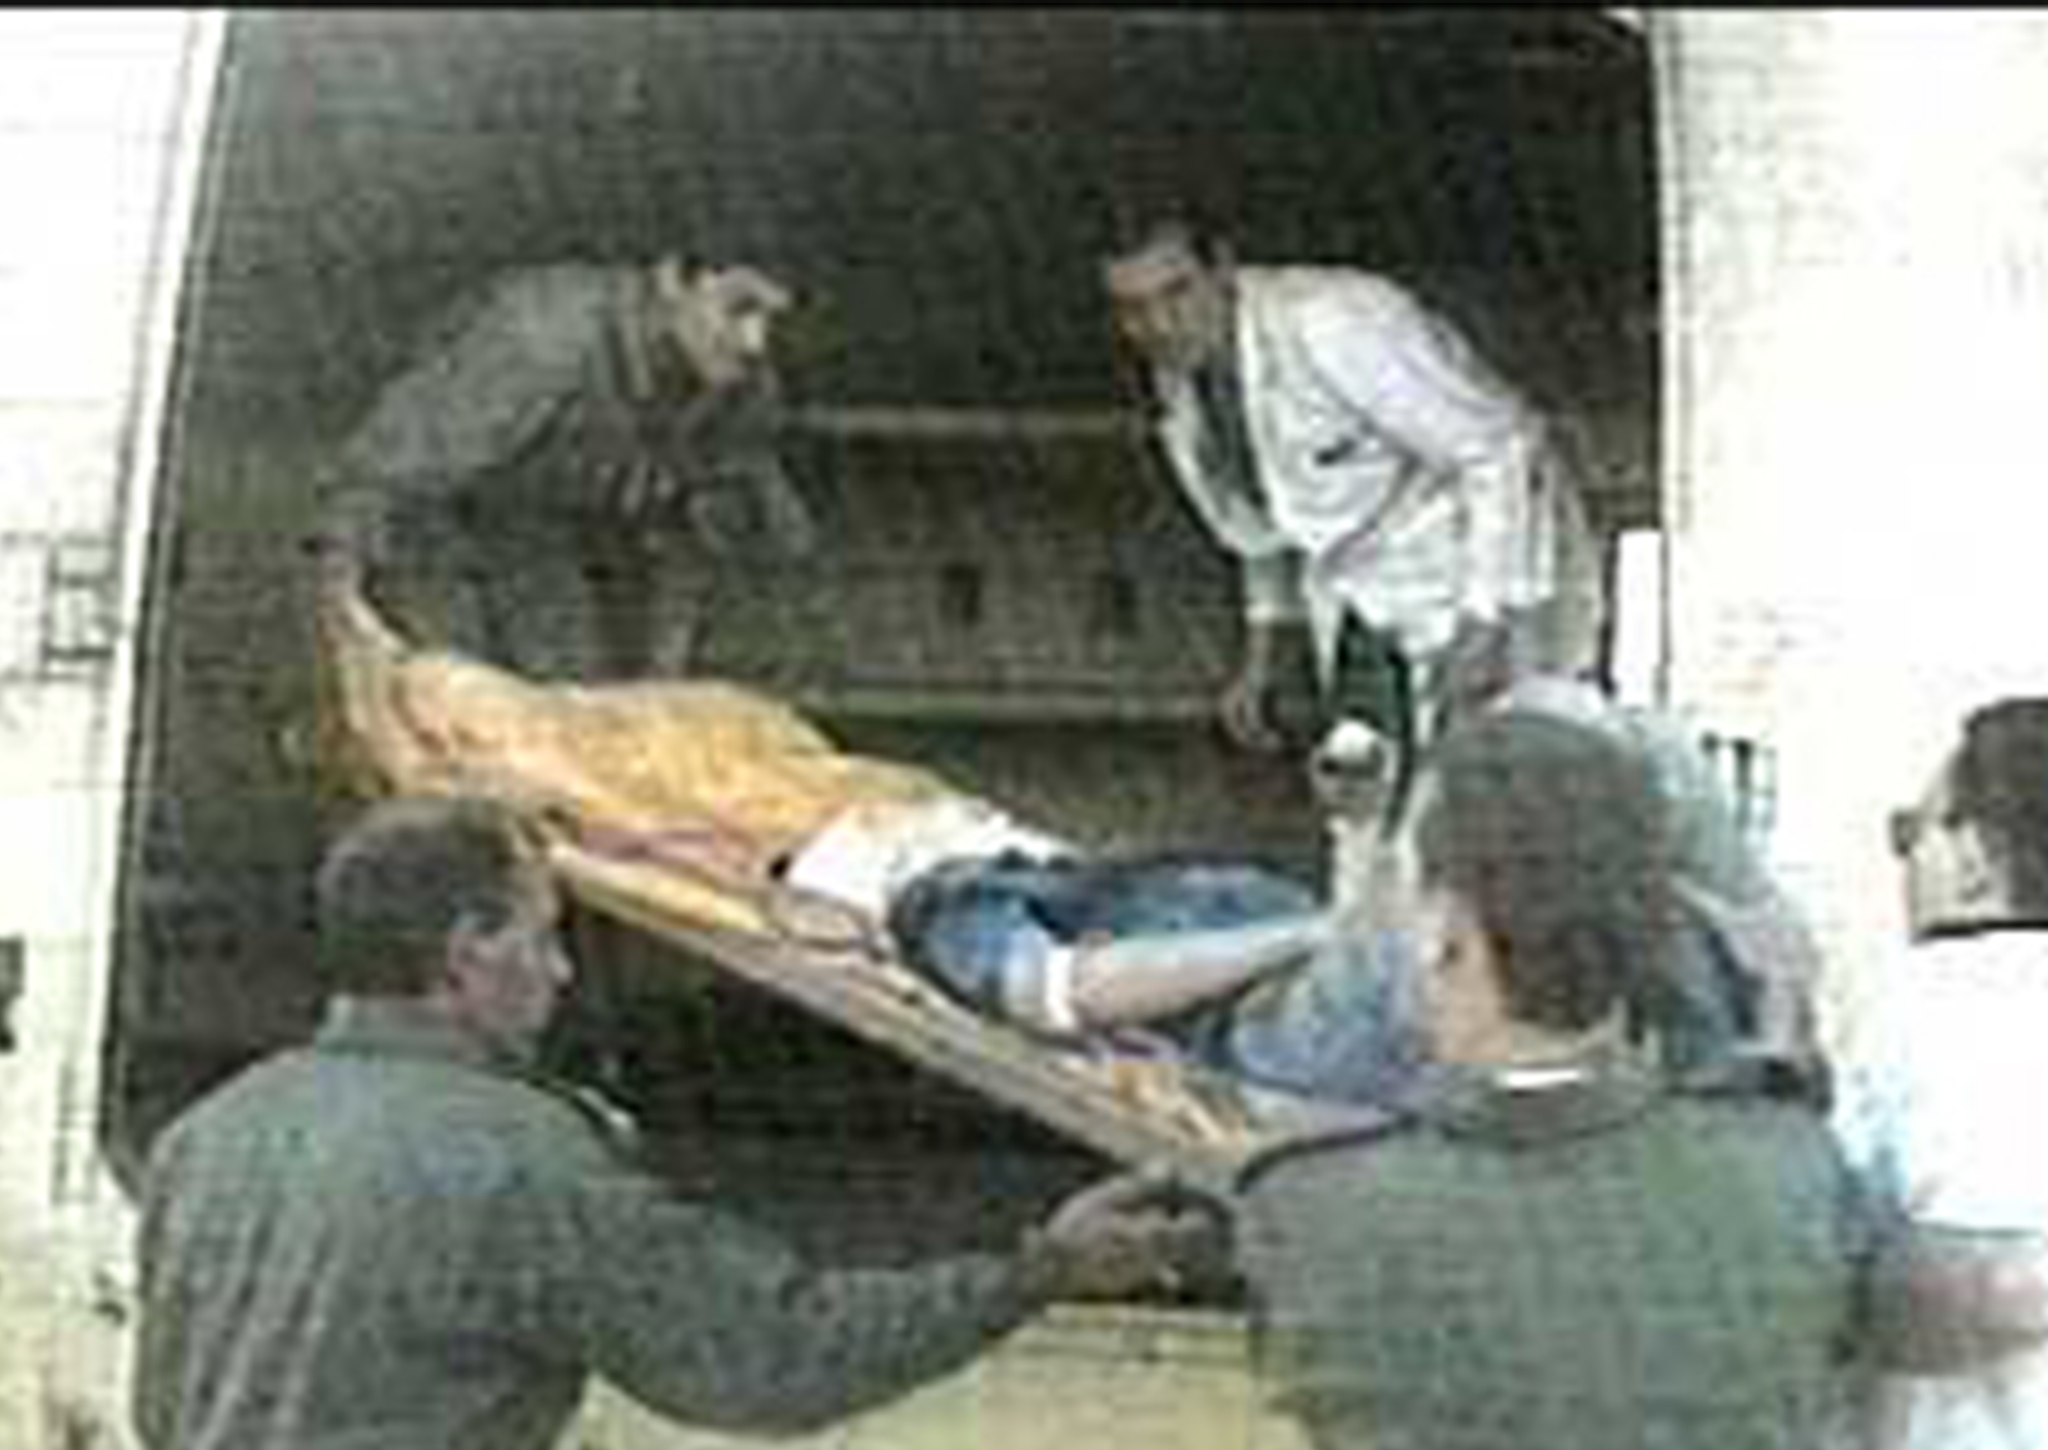 Egyptian emergency workers treat a victim of the 1997 Luxor attack